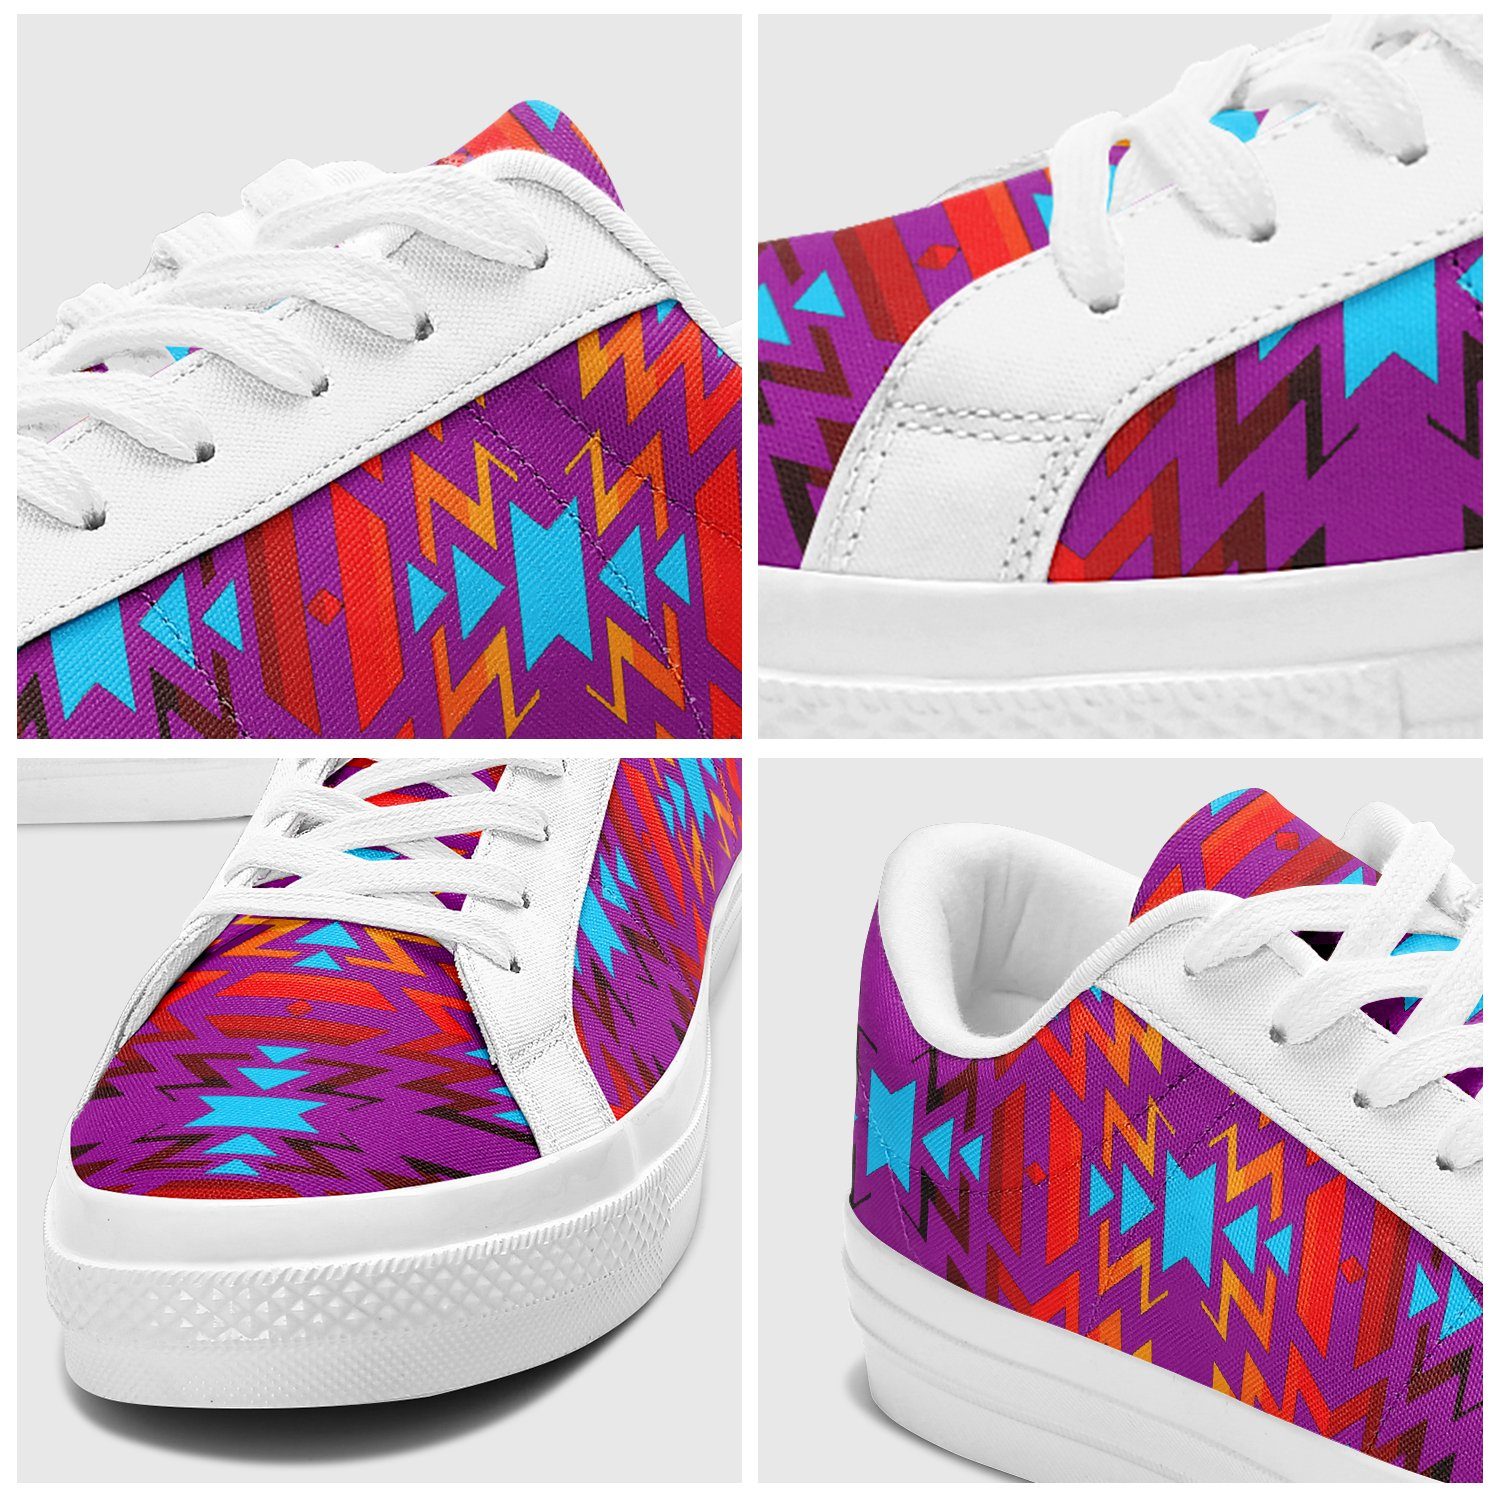 Big Pattern Fire Colors and Turquoise Purple Aapisi Low Top Canvas Shoes White Sole 49 Dzine 